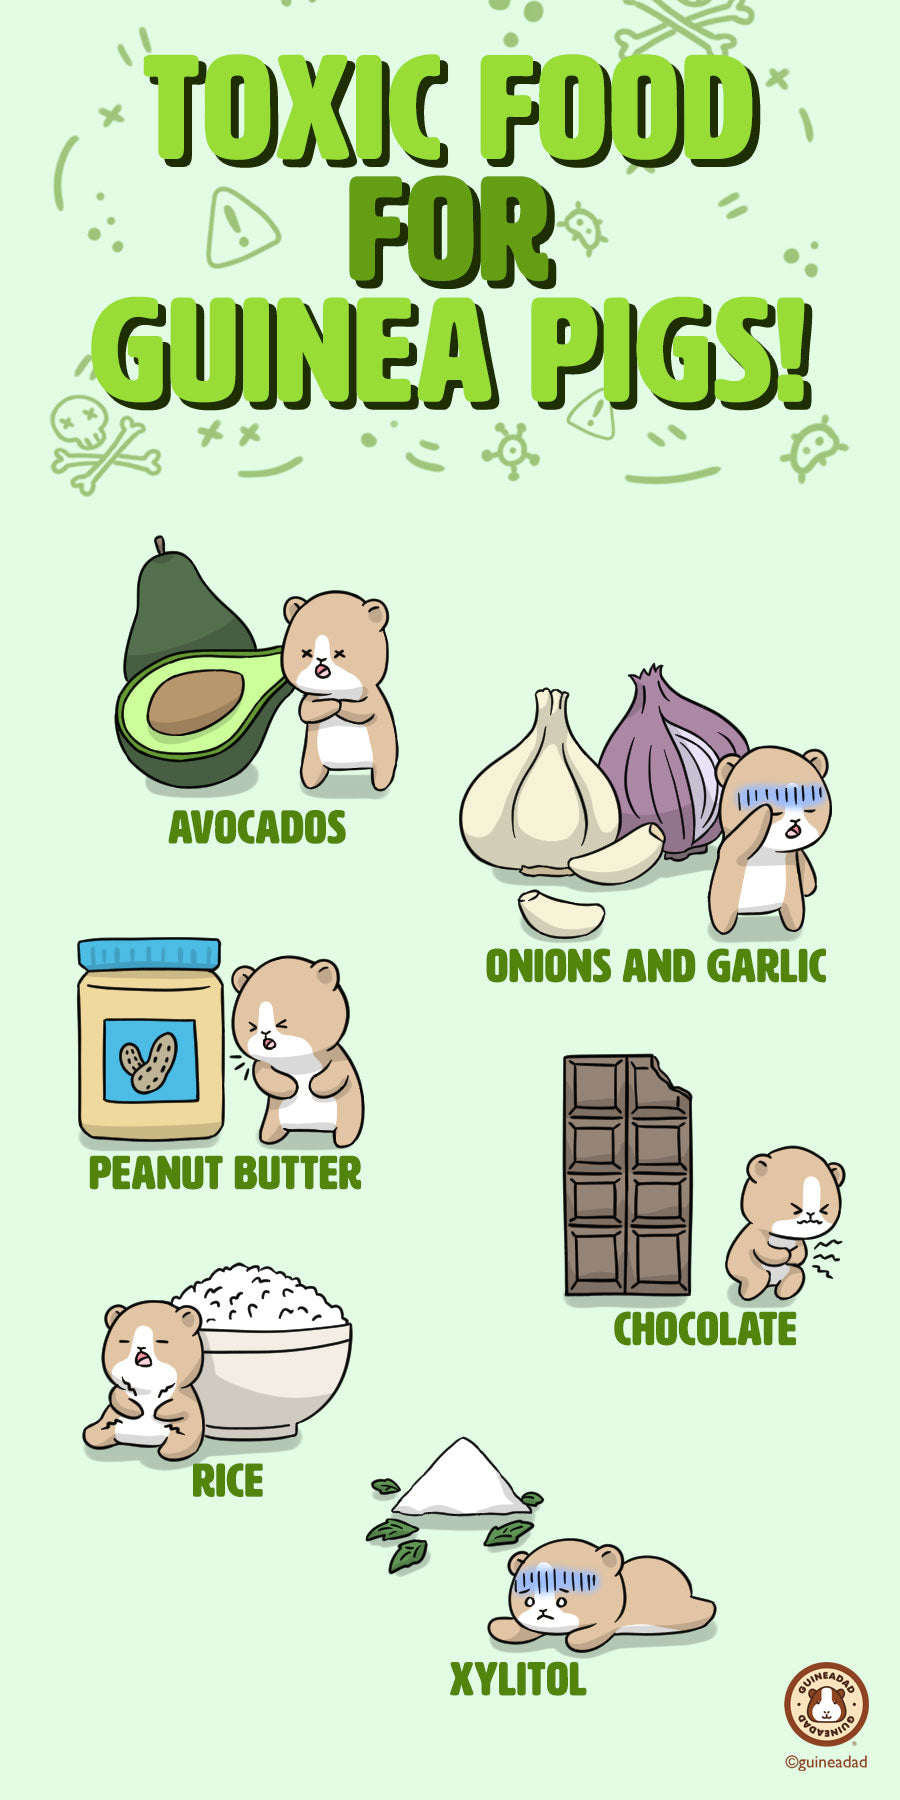 Harmful foods for guinea pigs